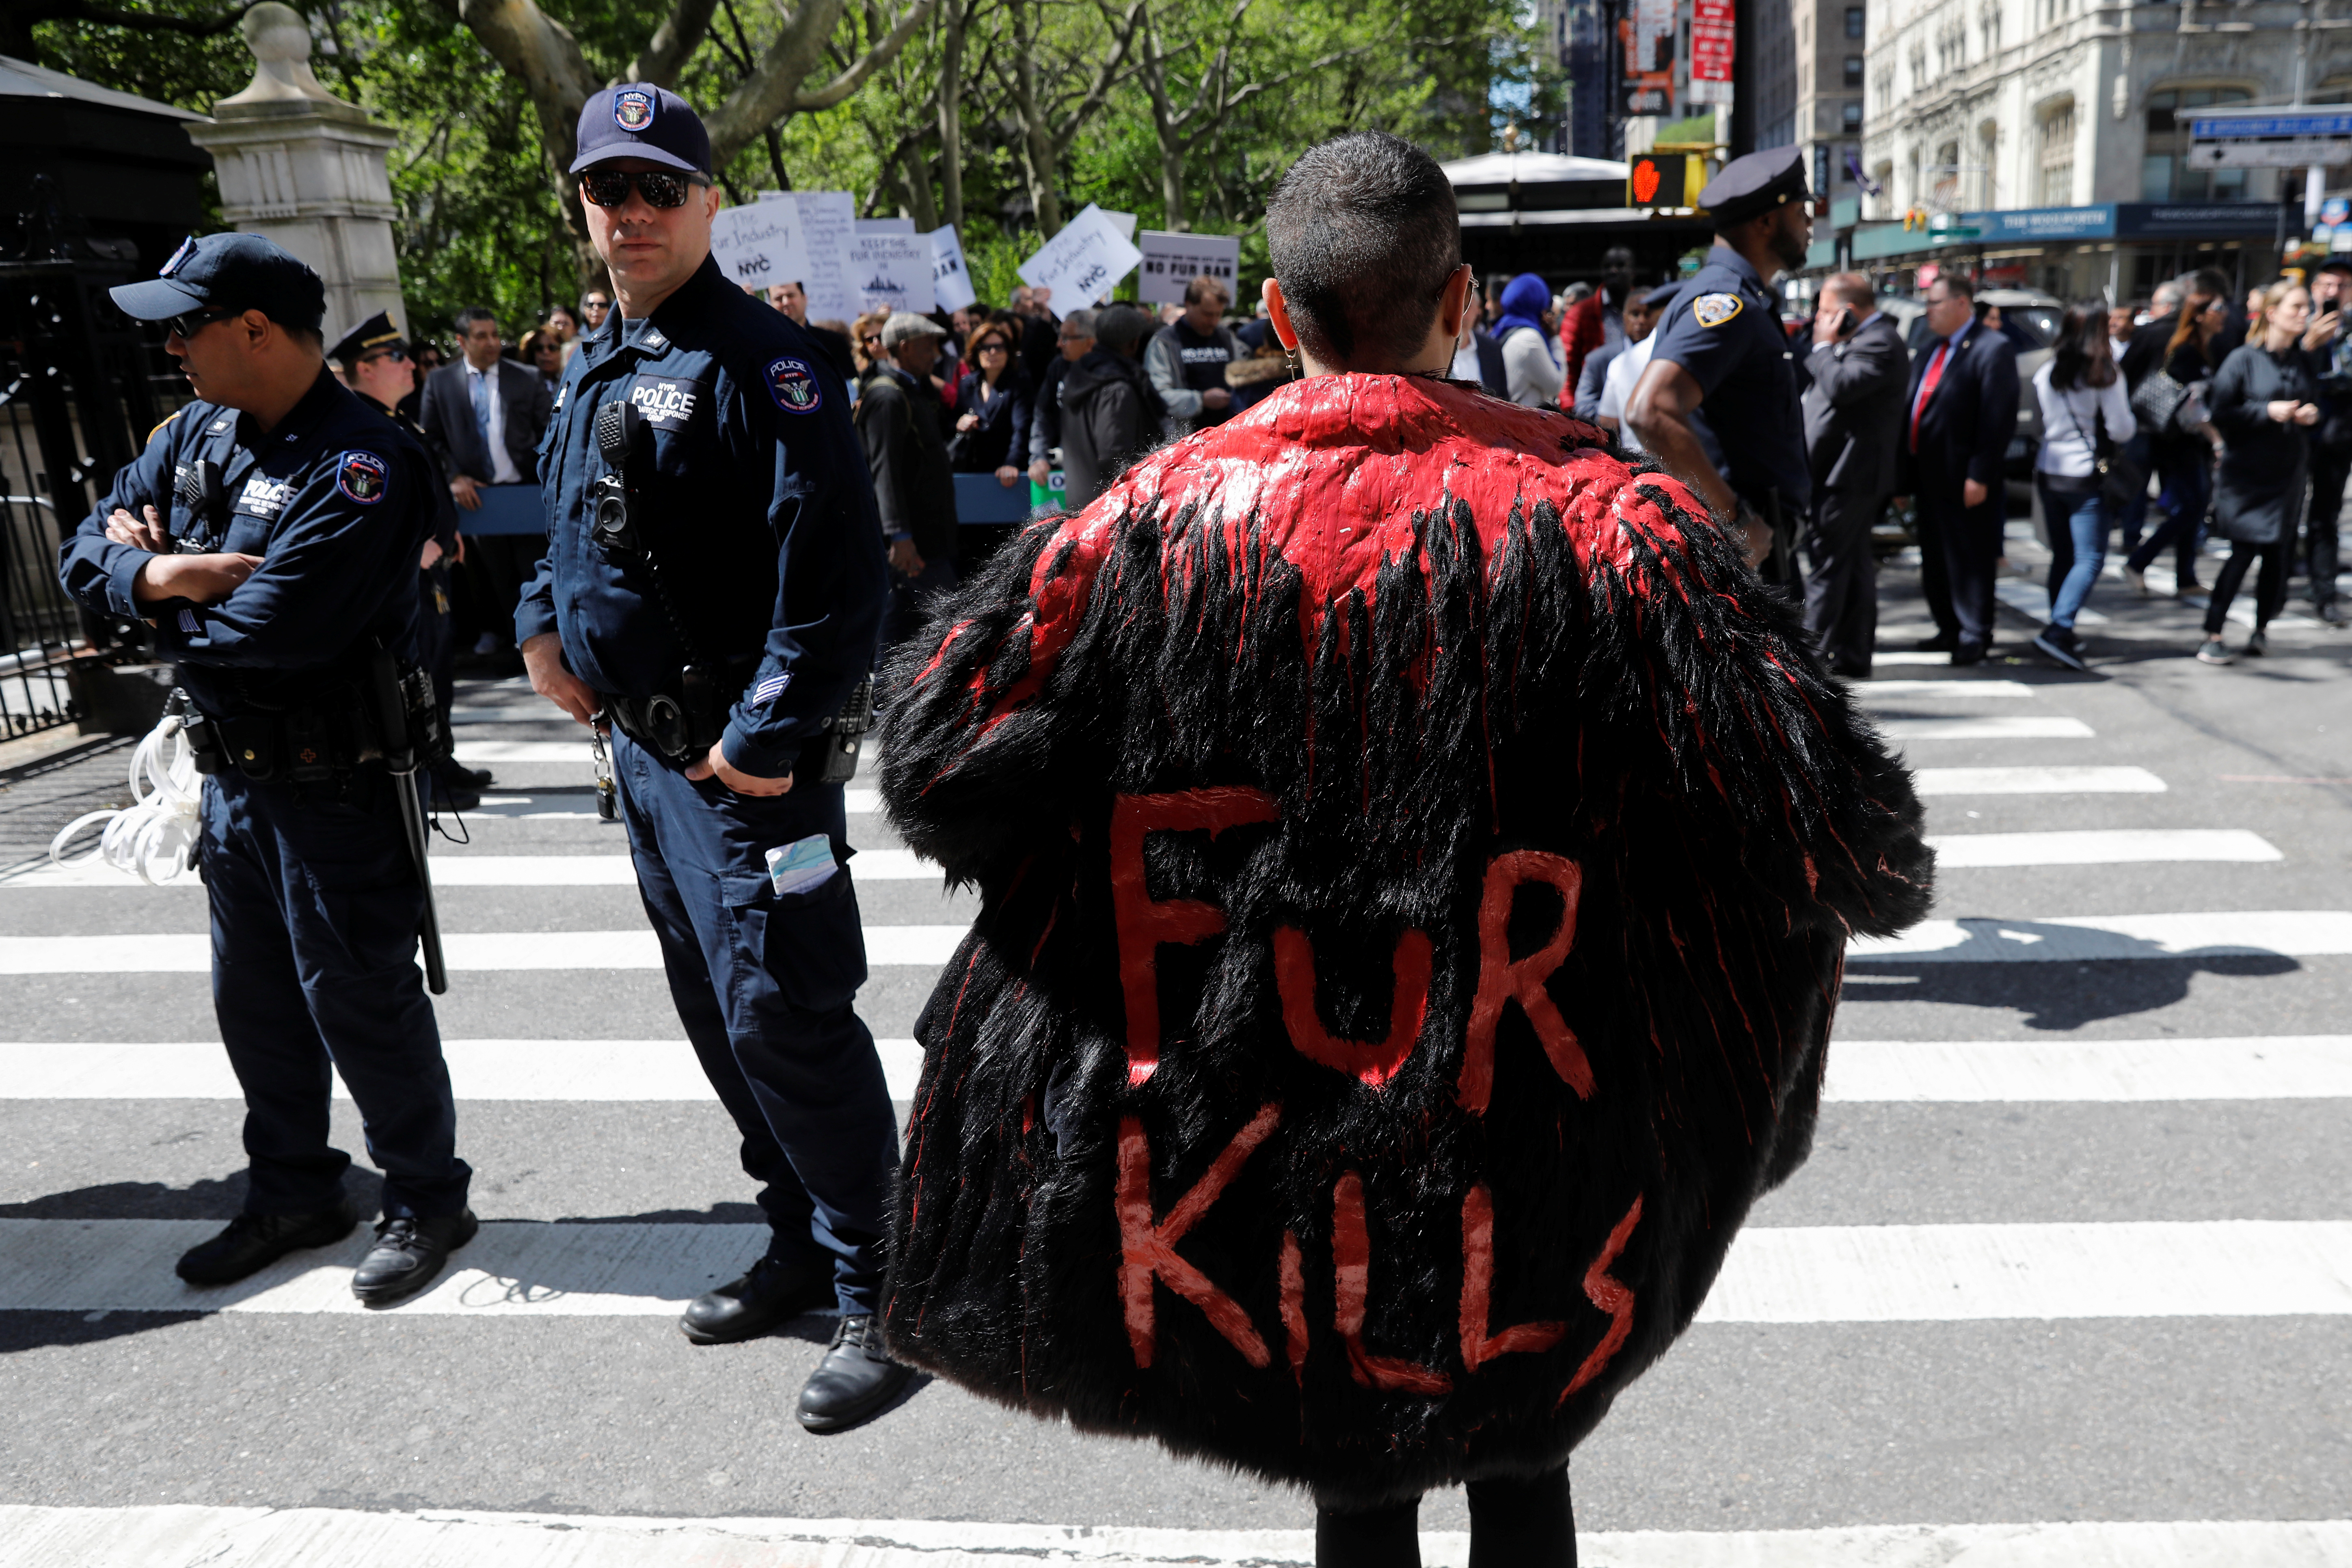 A supporter on the ban on fur sales demonstrates outside of City Hall in New York, U.S., May 15, 2019. REUTERS/Shannon Stapleton